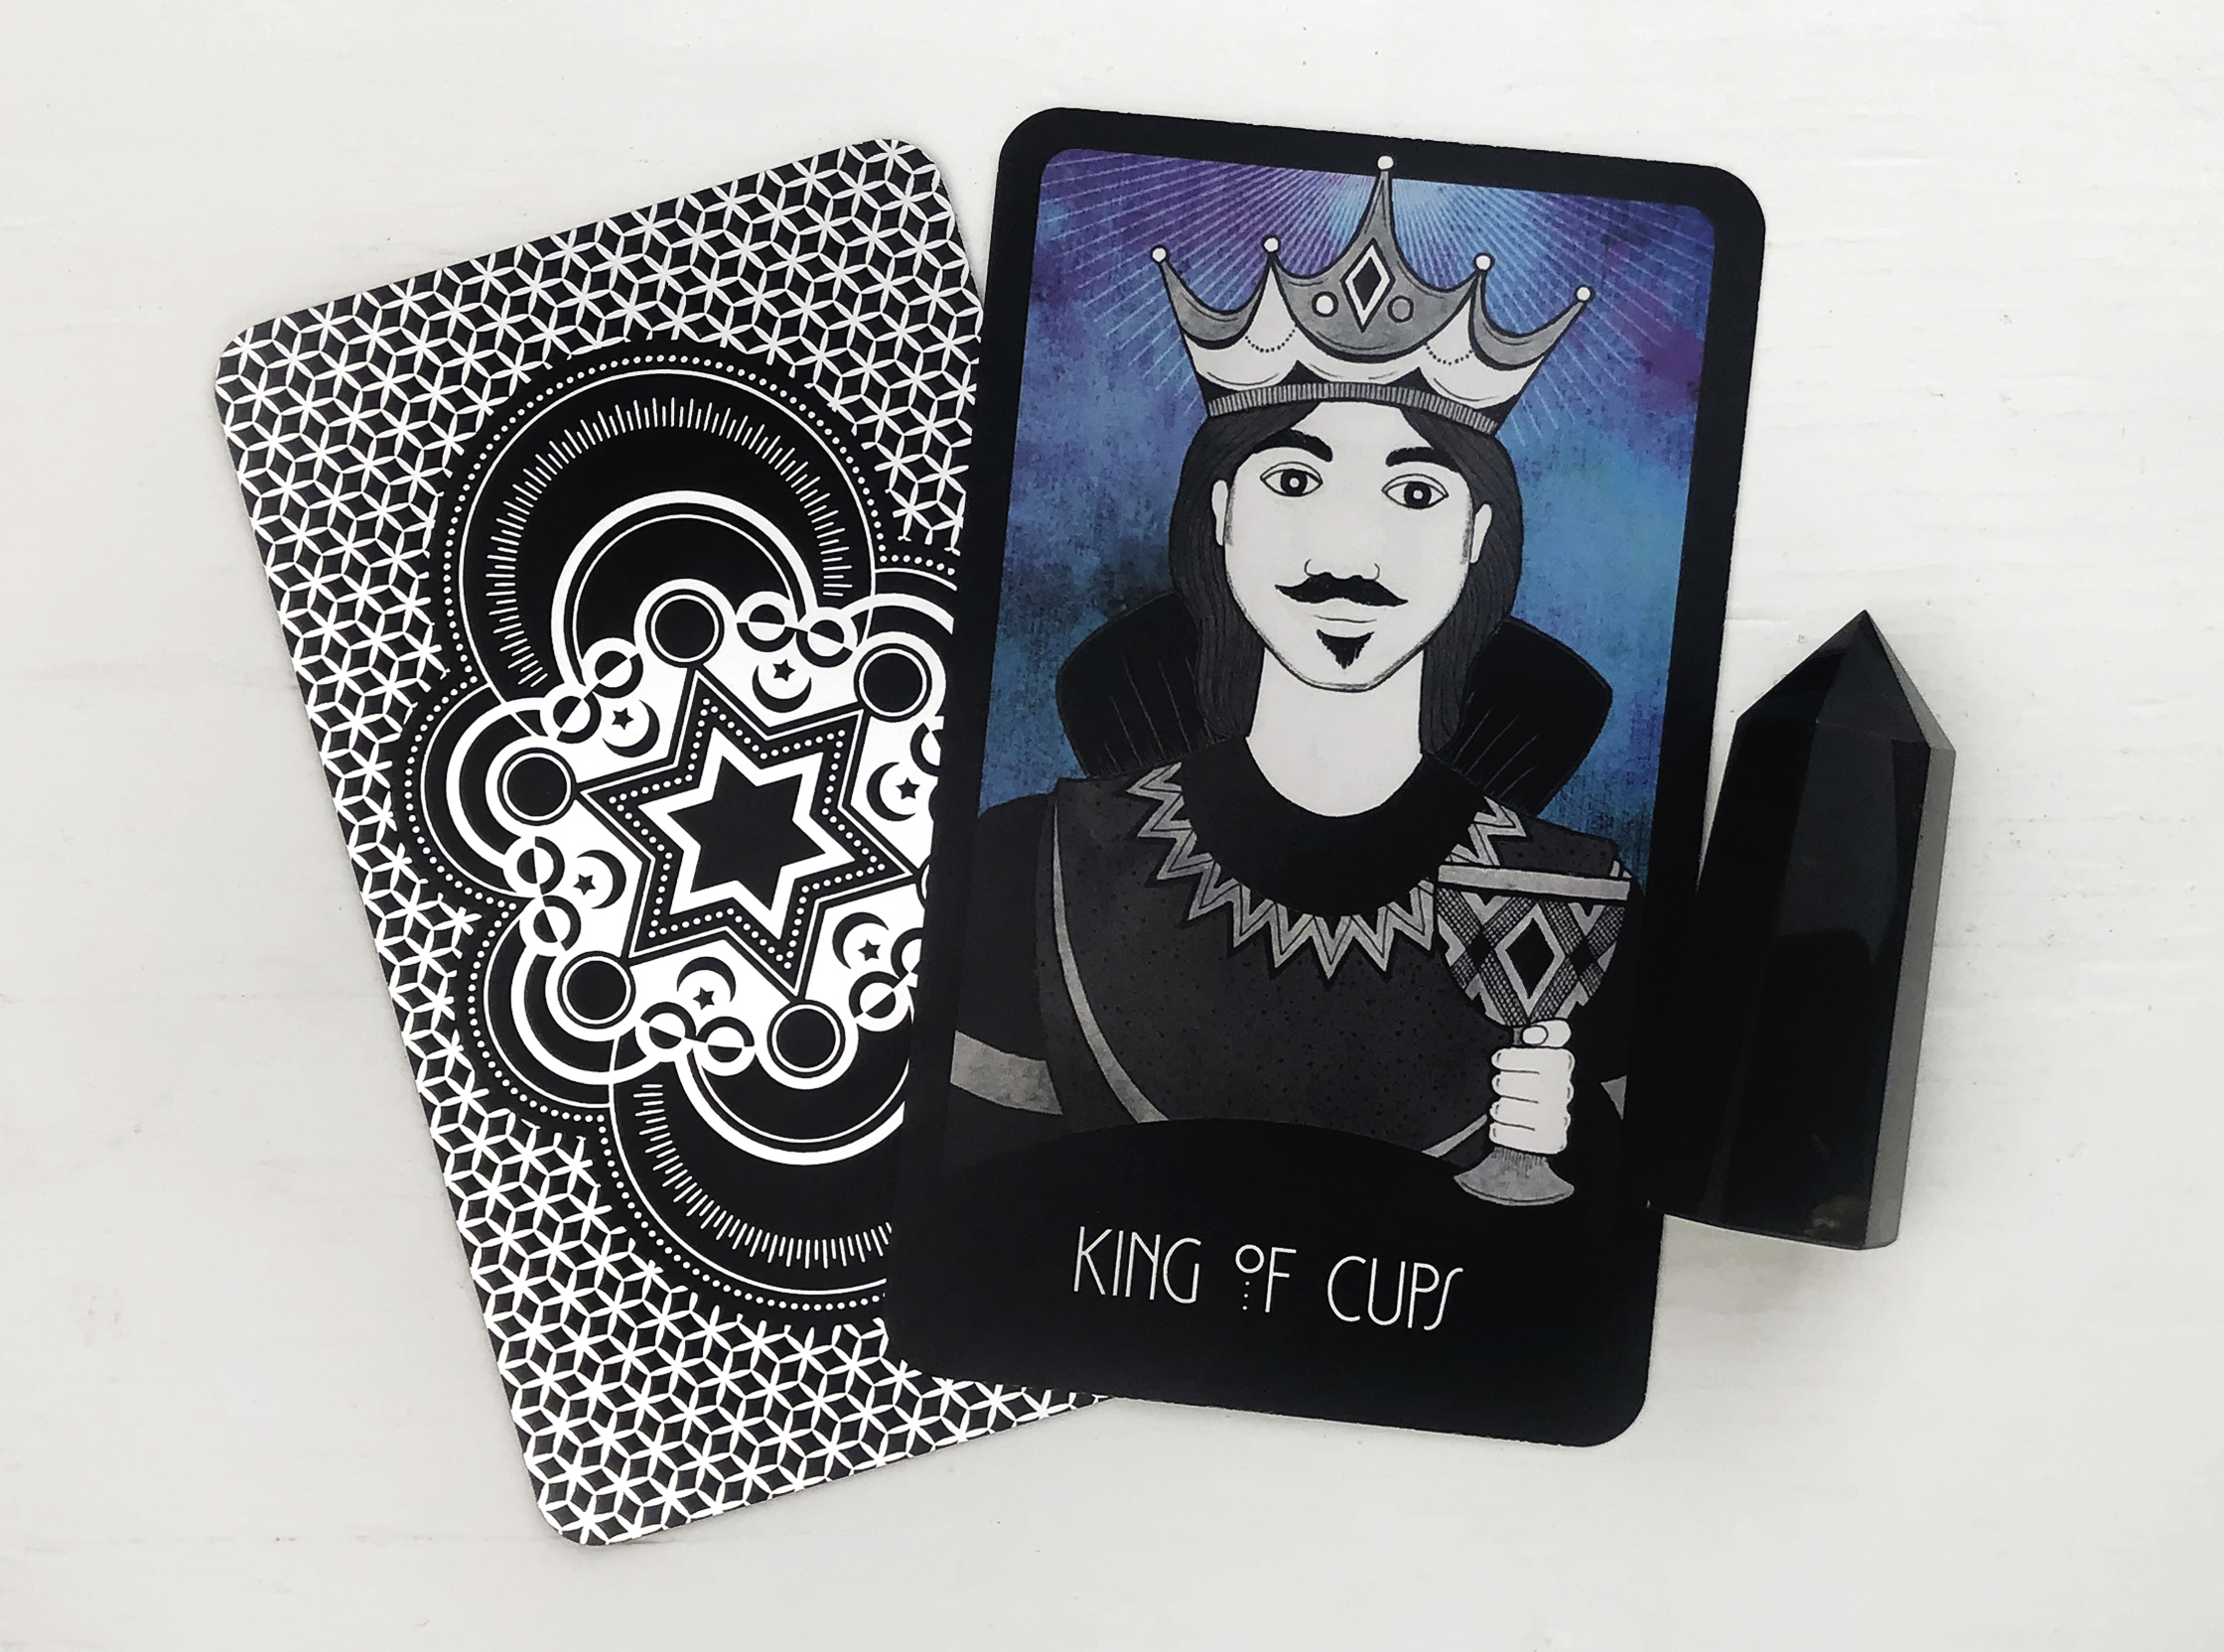 The Seven of Cups Tarot Card Meaning: Love, Career, Feelings